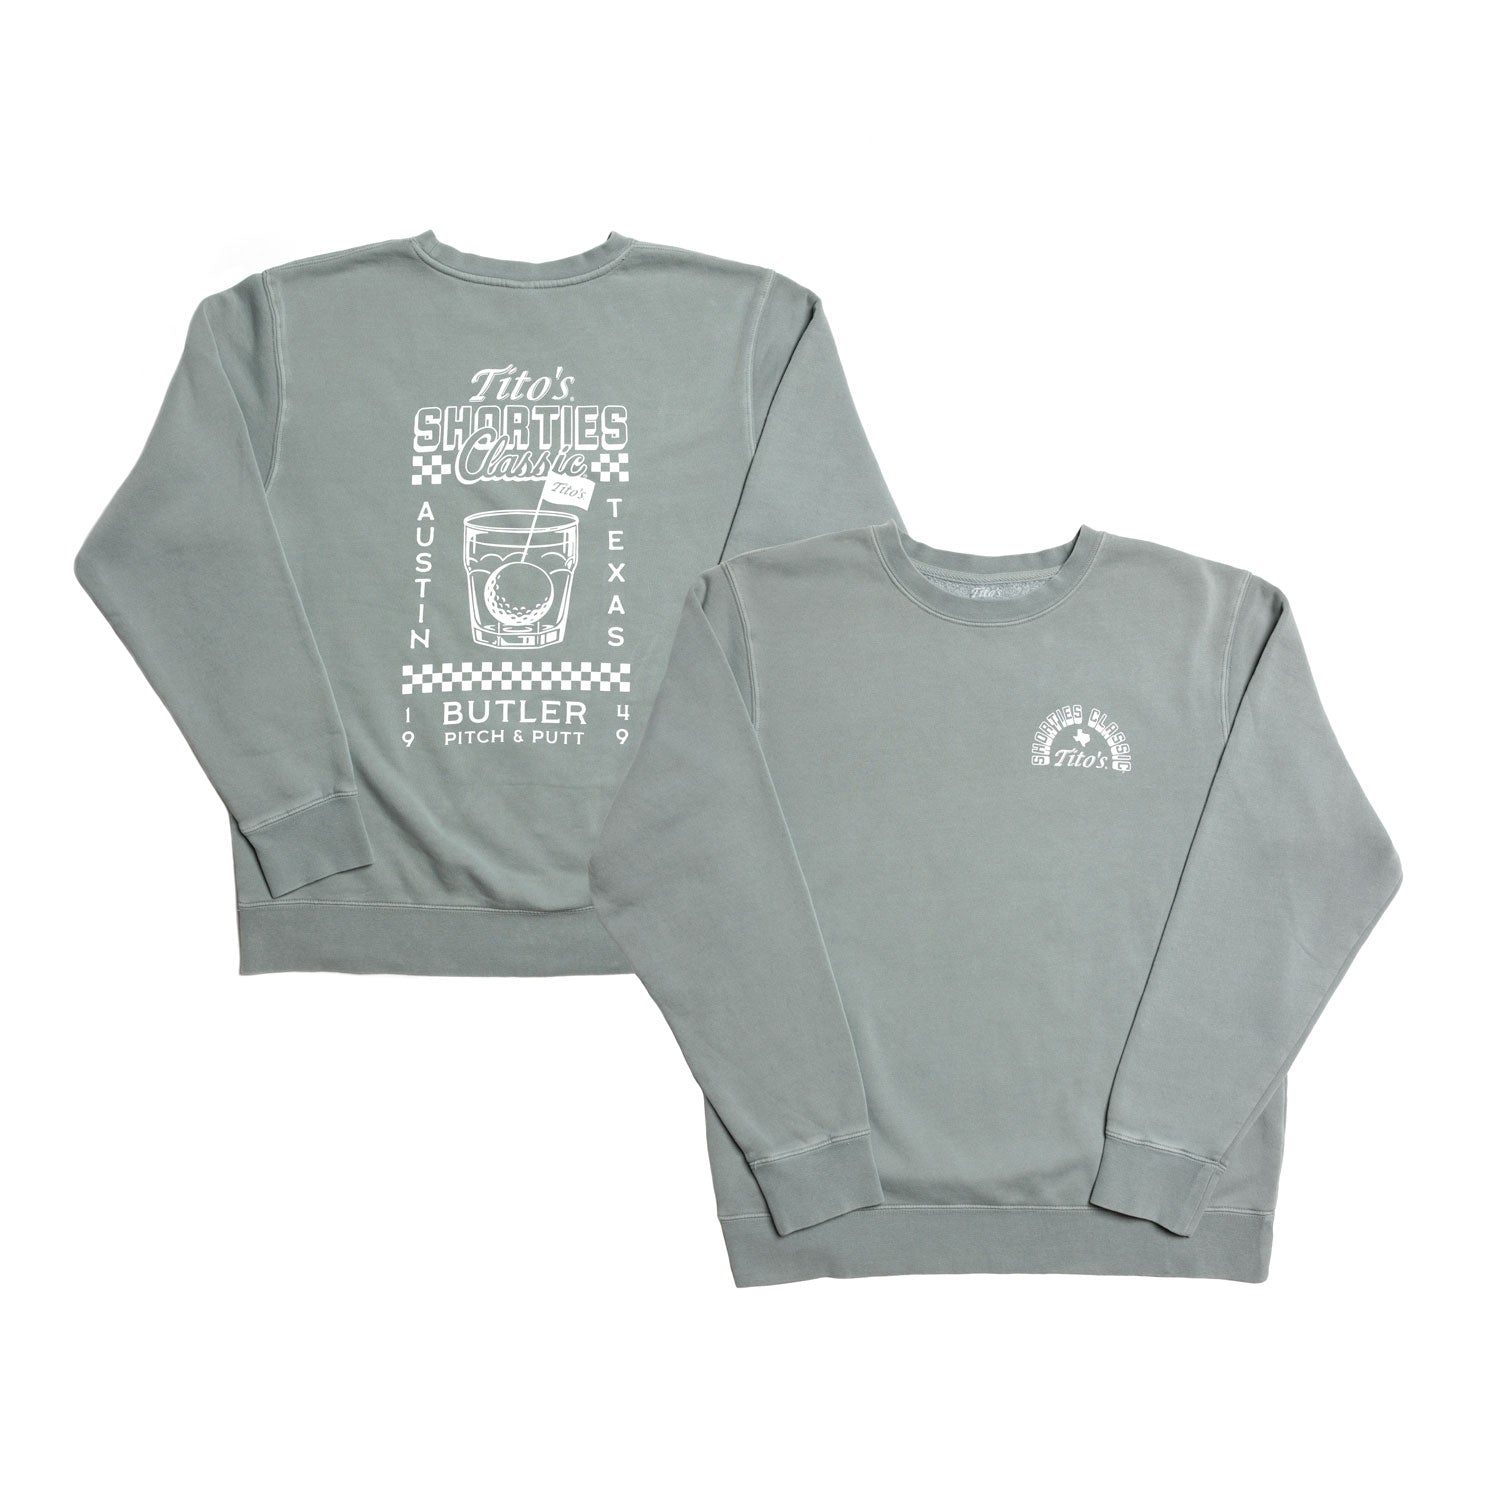 Sage green crewneck sweatshirt with Tito's Shorties Classic wordmark on front and Tito's Shorties Classic, Butler Pitch & Putt, Austin, Texas with cocktail design on back